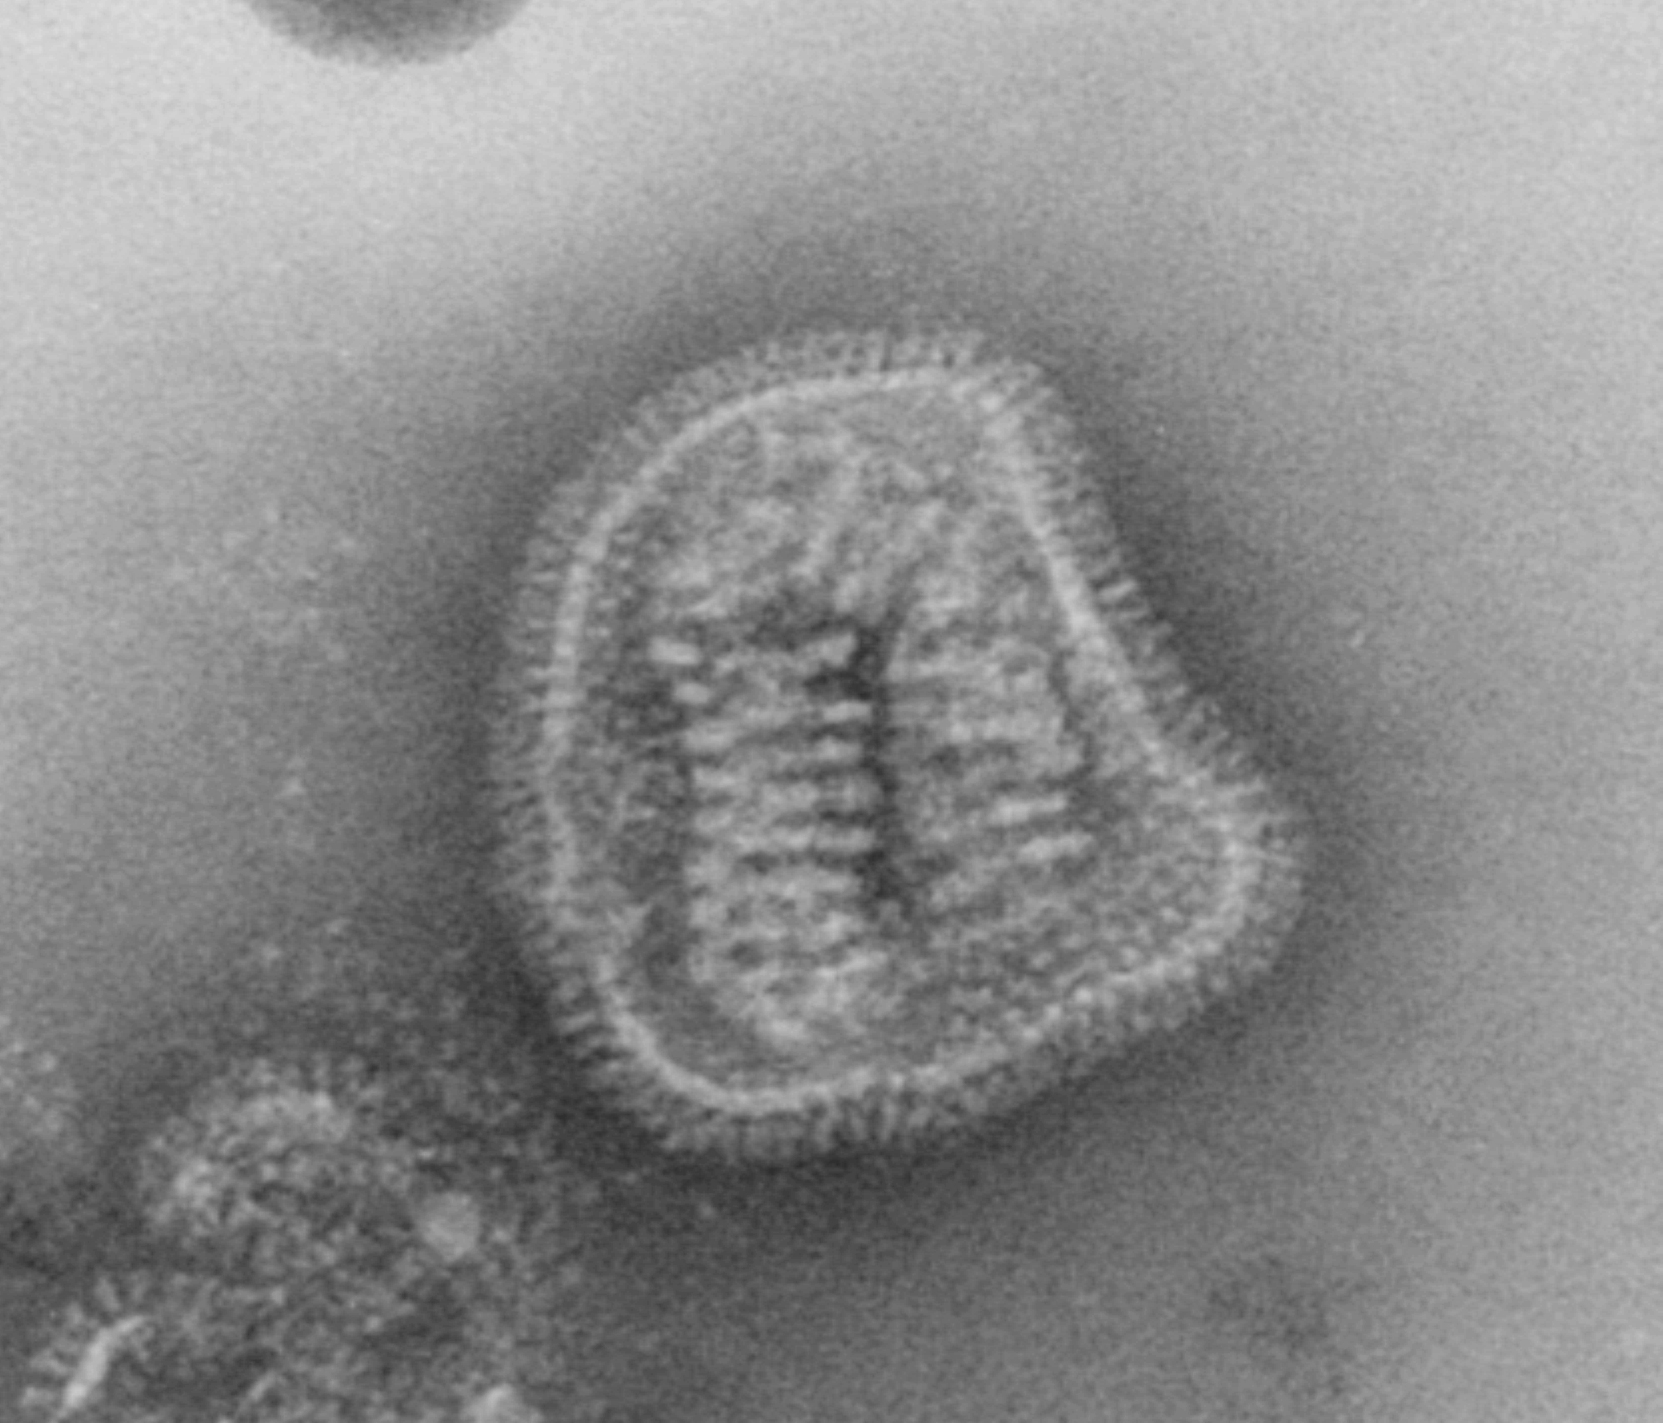 This negative-stained transmission electron micrograph (TEM) depicts the ultrastructural details of an influenza virus particle, or “virion”. A member of the taxonomic family Orthomyxoviridae, the influenza virus is an enveloped, single-stranded RNA virus. Eight helical capsis are surrounded by the viral envelope. Particle diameter: 80 -120 nm